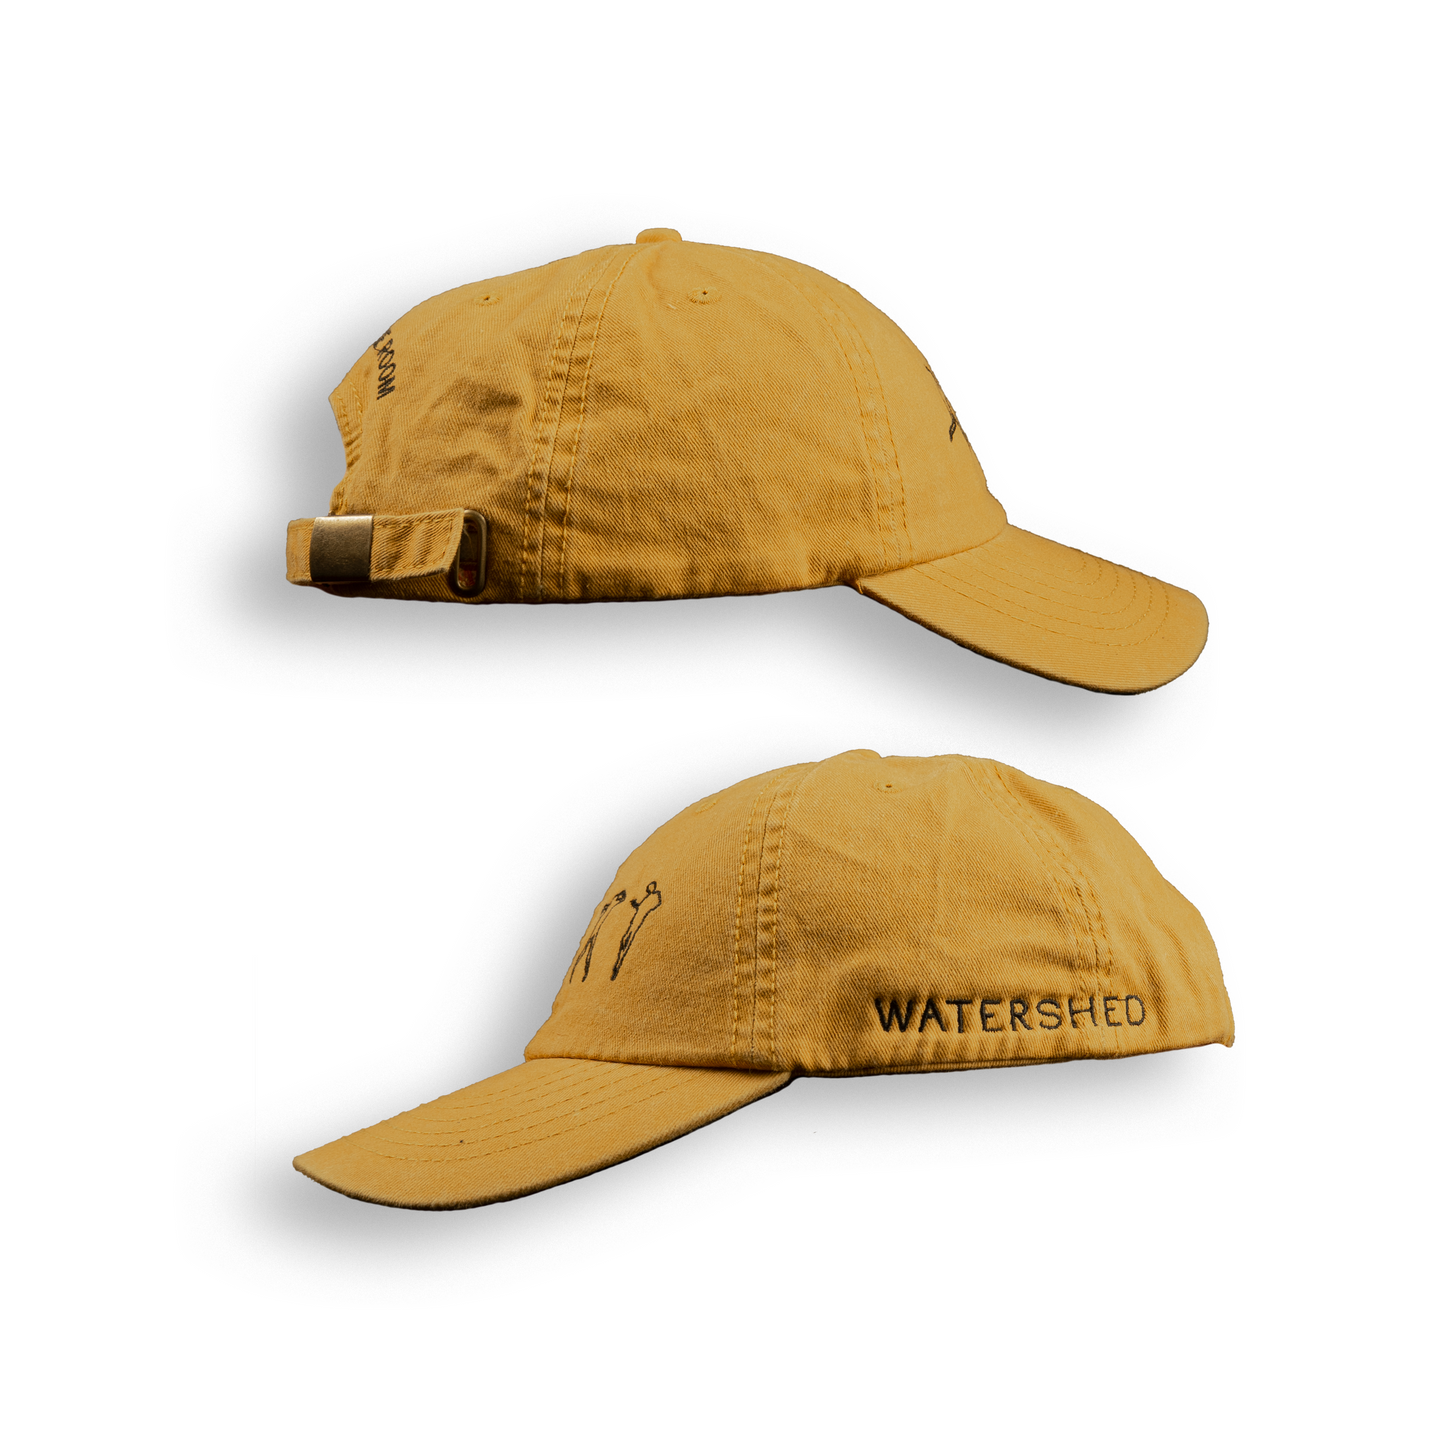 Watershed - Cap, available in 3 colors